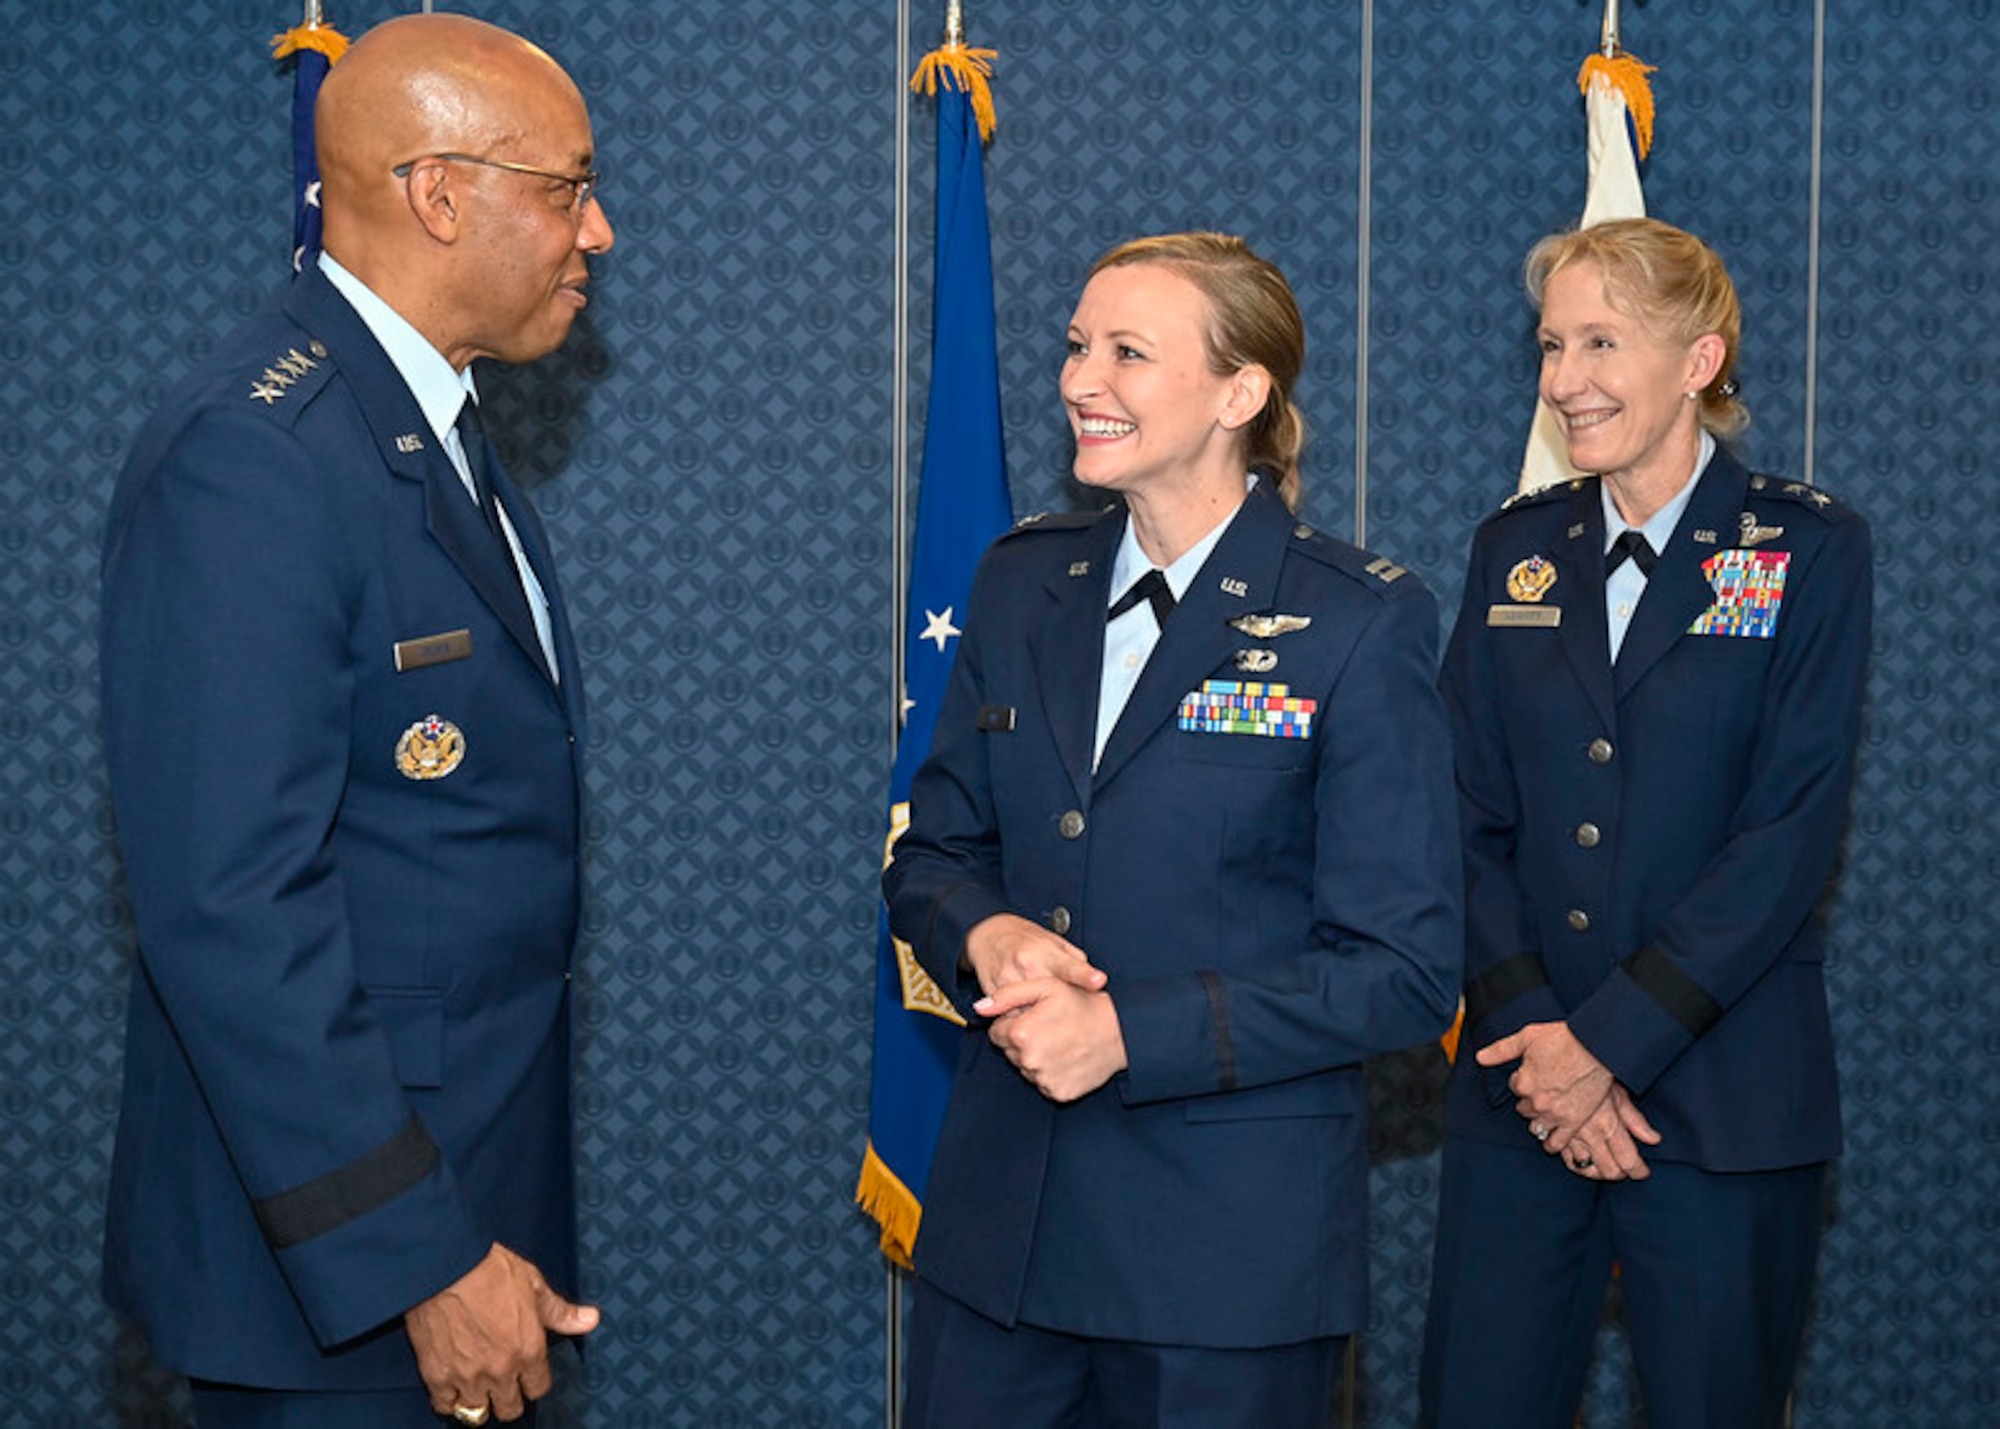 Moody AFB pilot becomes first female to receive Kolligian Trophy